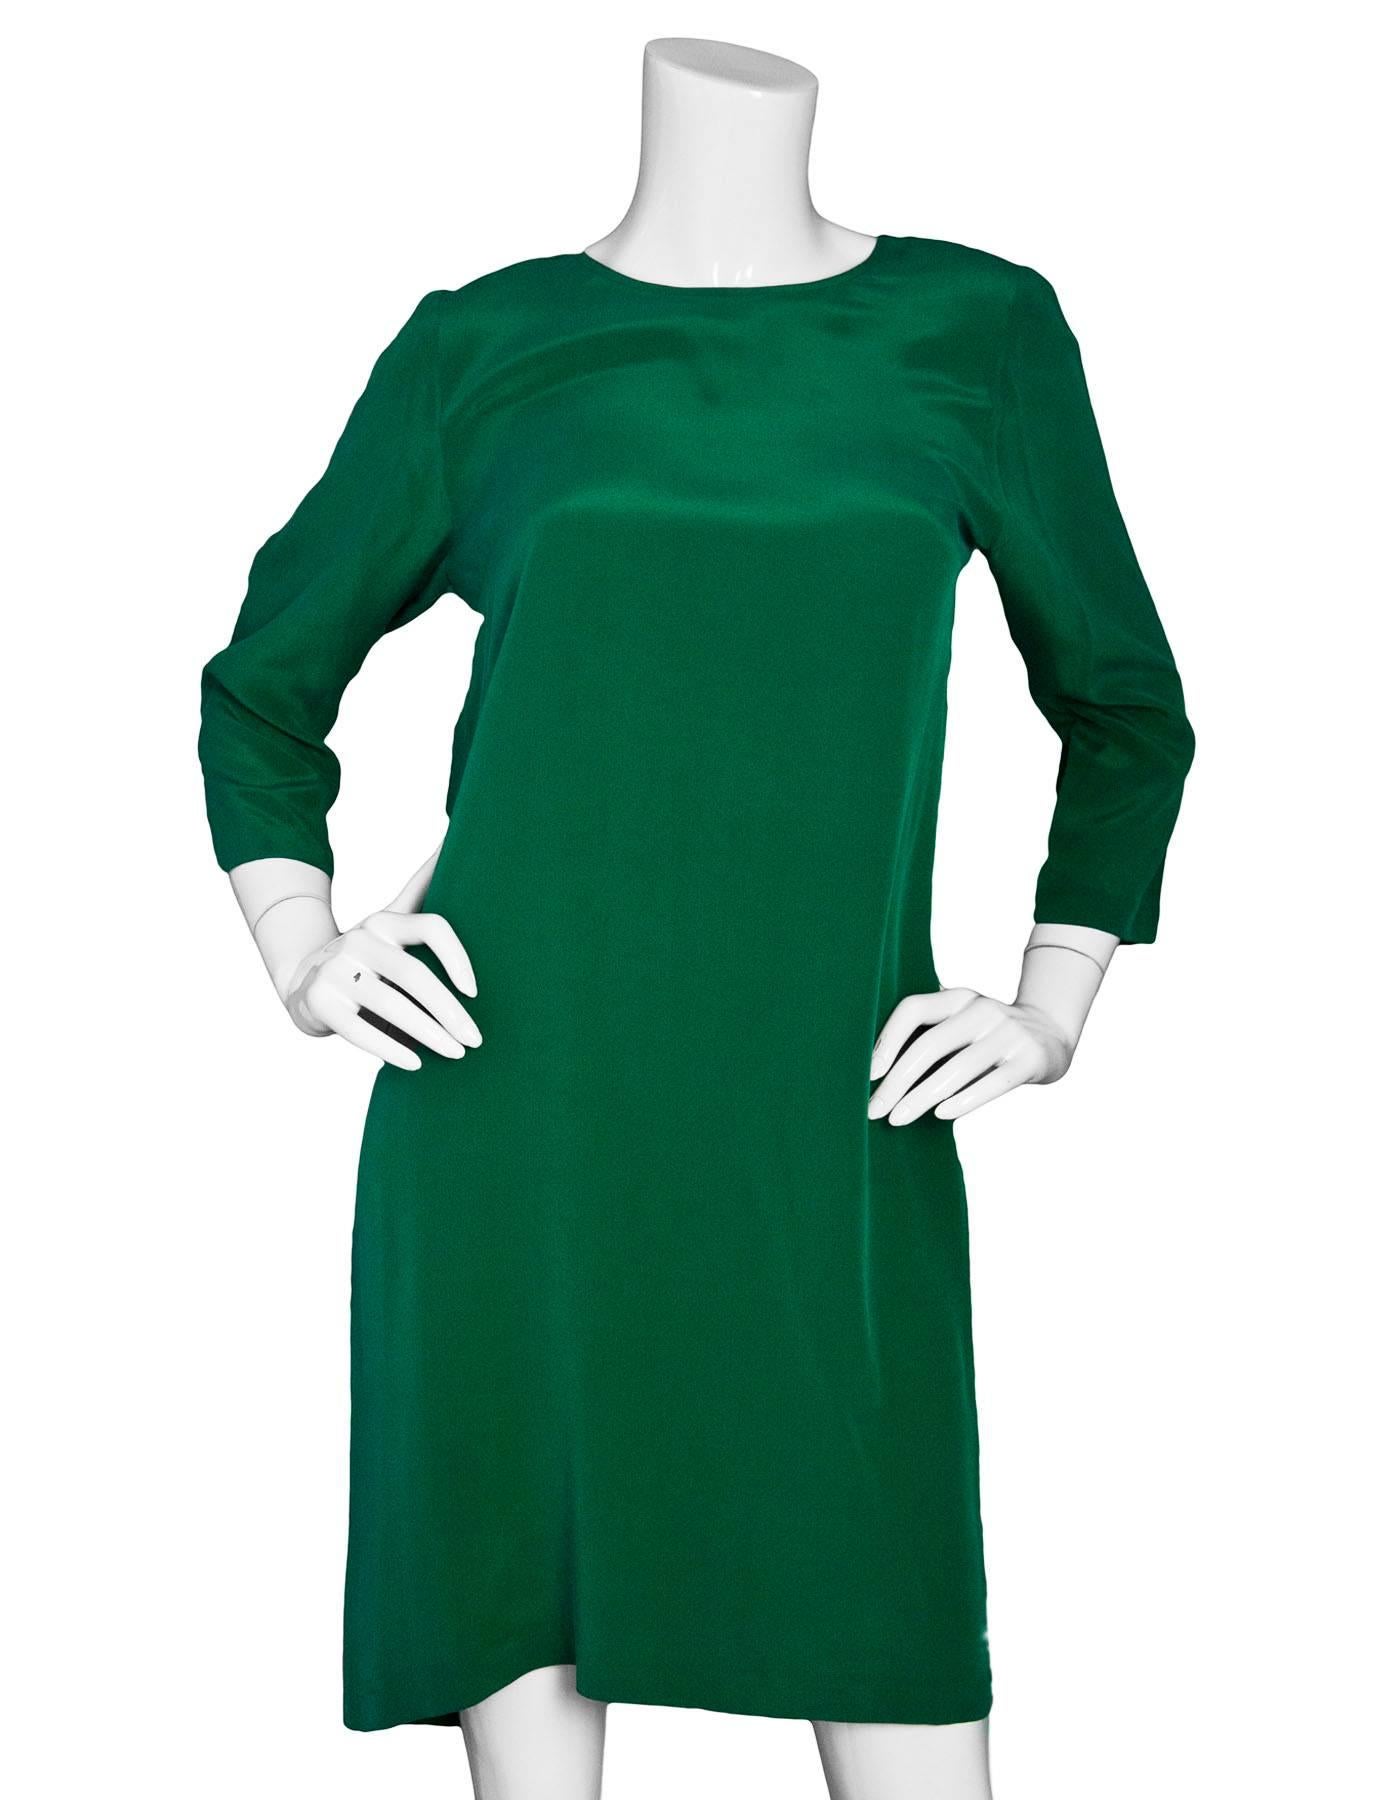 Nieves Lavi Green Silk Dress Sz 6

Made In: China
Color: Green
Composition: 100% Silk
Closure/Opening: Pull over with single buttin closure at back of neck
Overall Condition: Excellent pre-owned condition 
Marked Size: 6
Bust: 36
Waist: 38